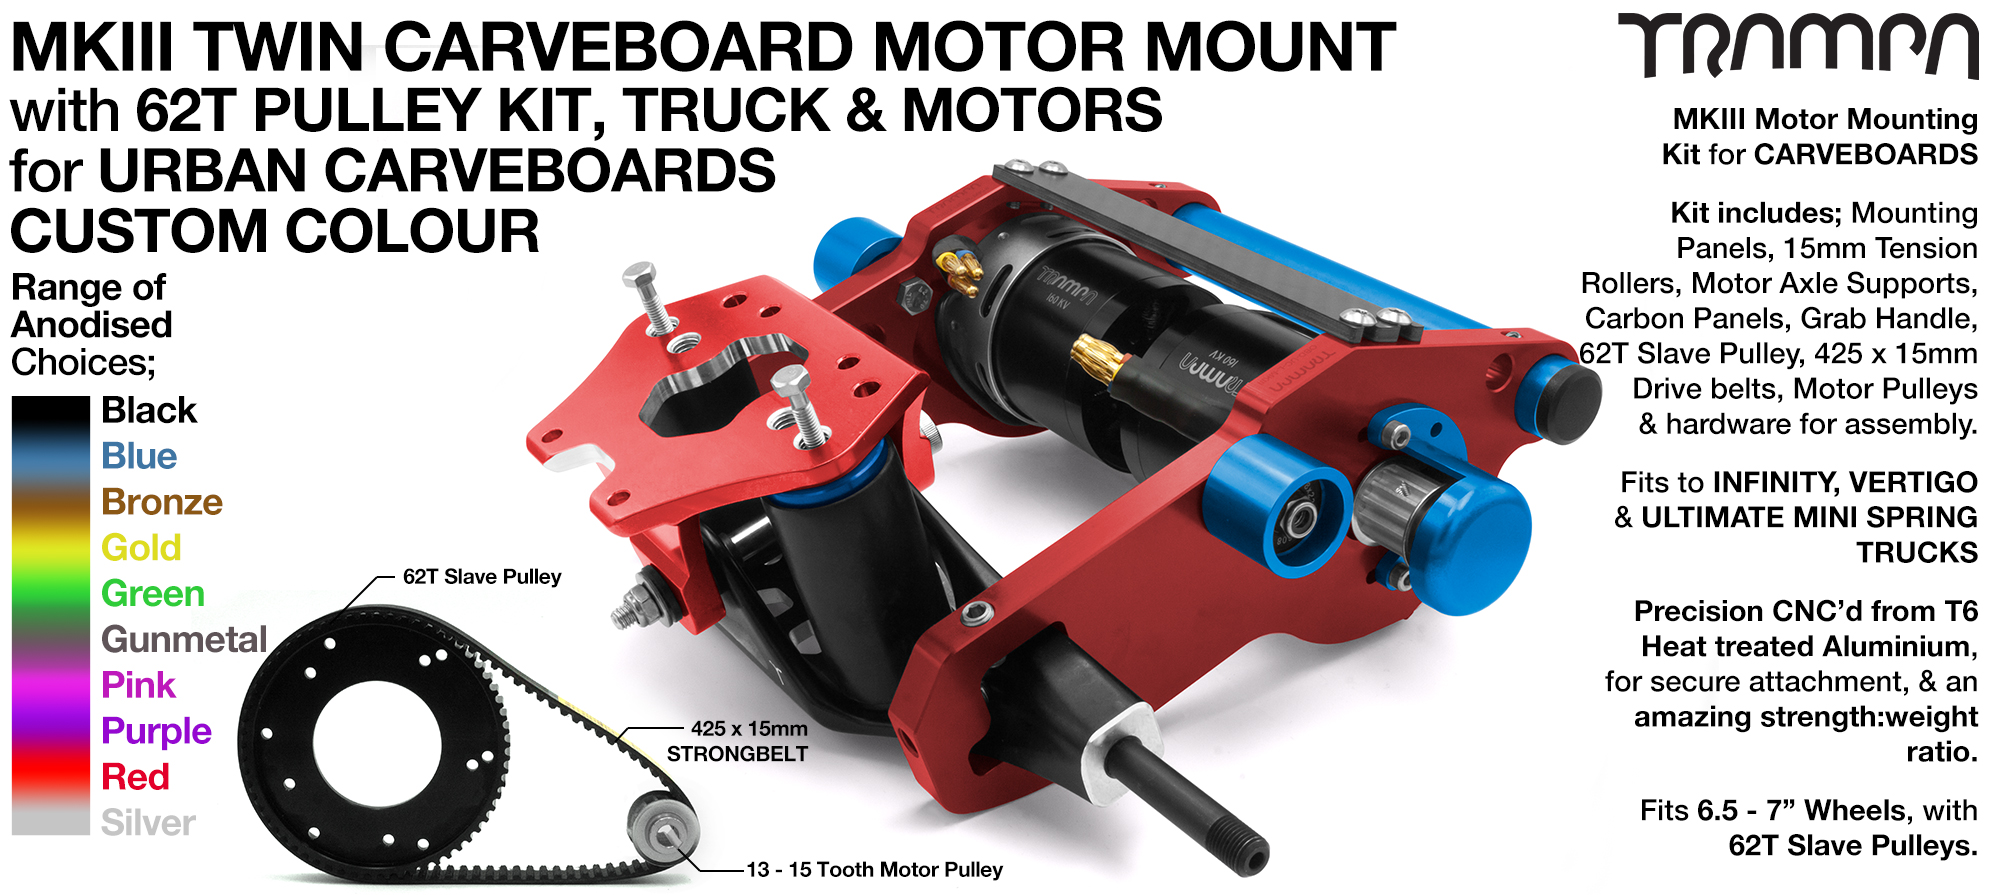 MkIII URBAN CARVEBOARD Motormount Connector Panel on a TRUCK with 62 Tooth Pulley Kit & Motor - TWIN 